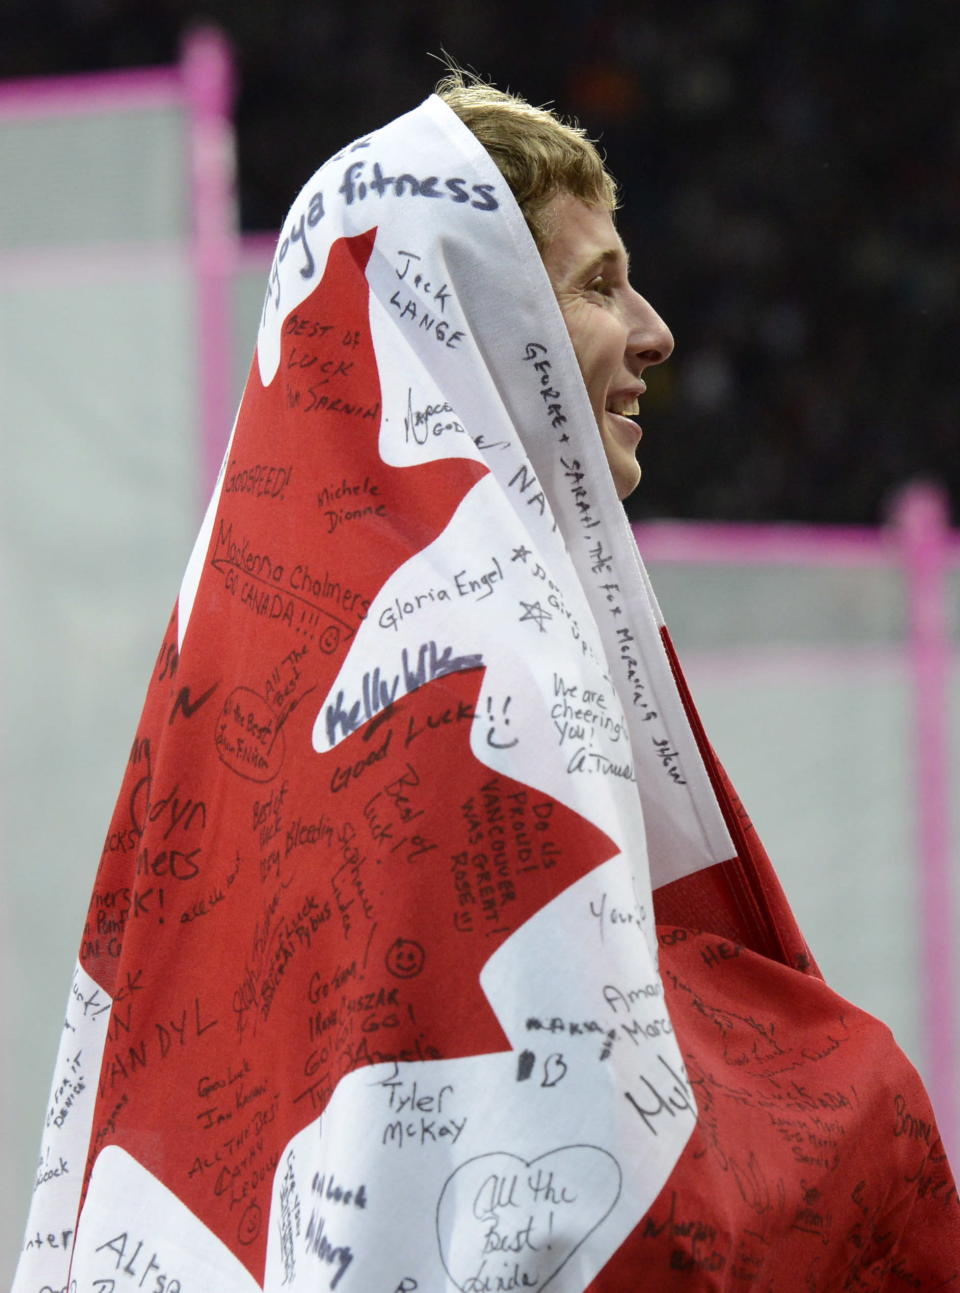 Canada's Derek Drouin wraps himself in the Canada flag as he celebrates his bronze in the men's high jump finals at the Olympic Stadium during the Summer Olympics in London on Tuesday, August 7, 2012. THE CANADIAN PRESS/Sean Kilpatrick